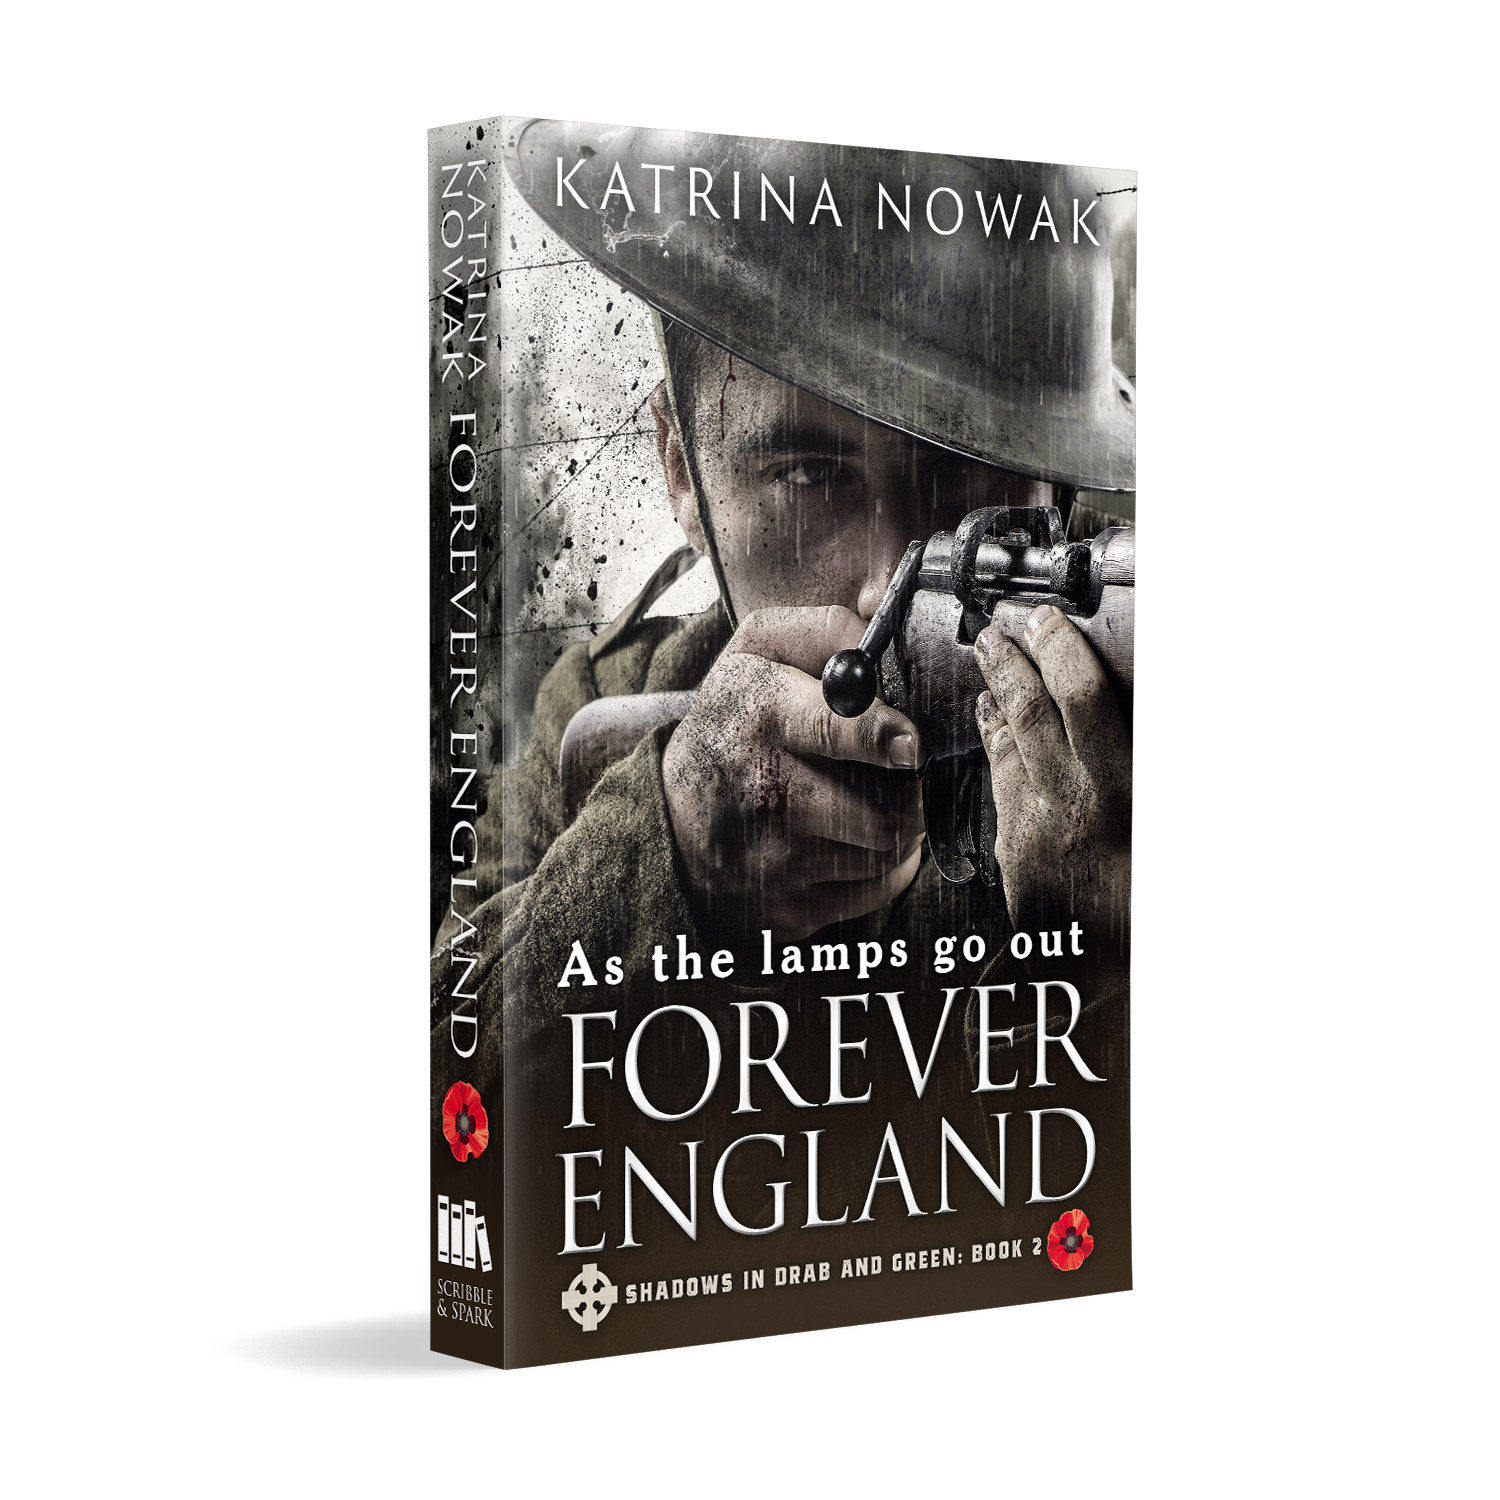 'Forever England' is the second volume in an epic fiction series set in around WW1. The author is Katrina Nowak. The book cover design and interior formatting are by Mark Thomas. To learn more about what Mark could do for your book, please visit coverness.com